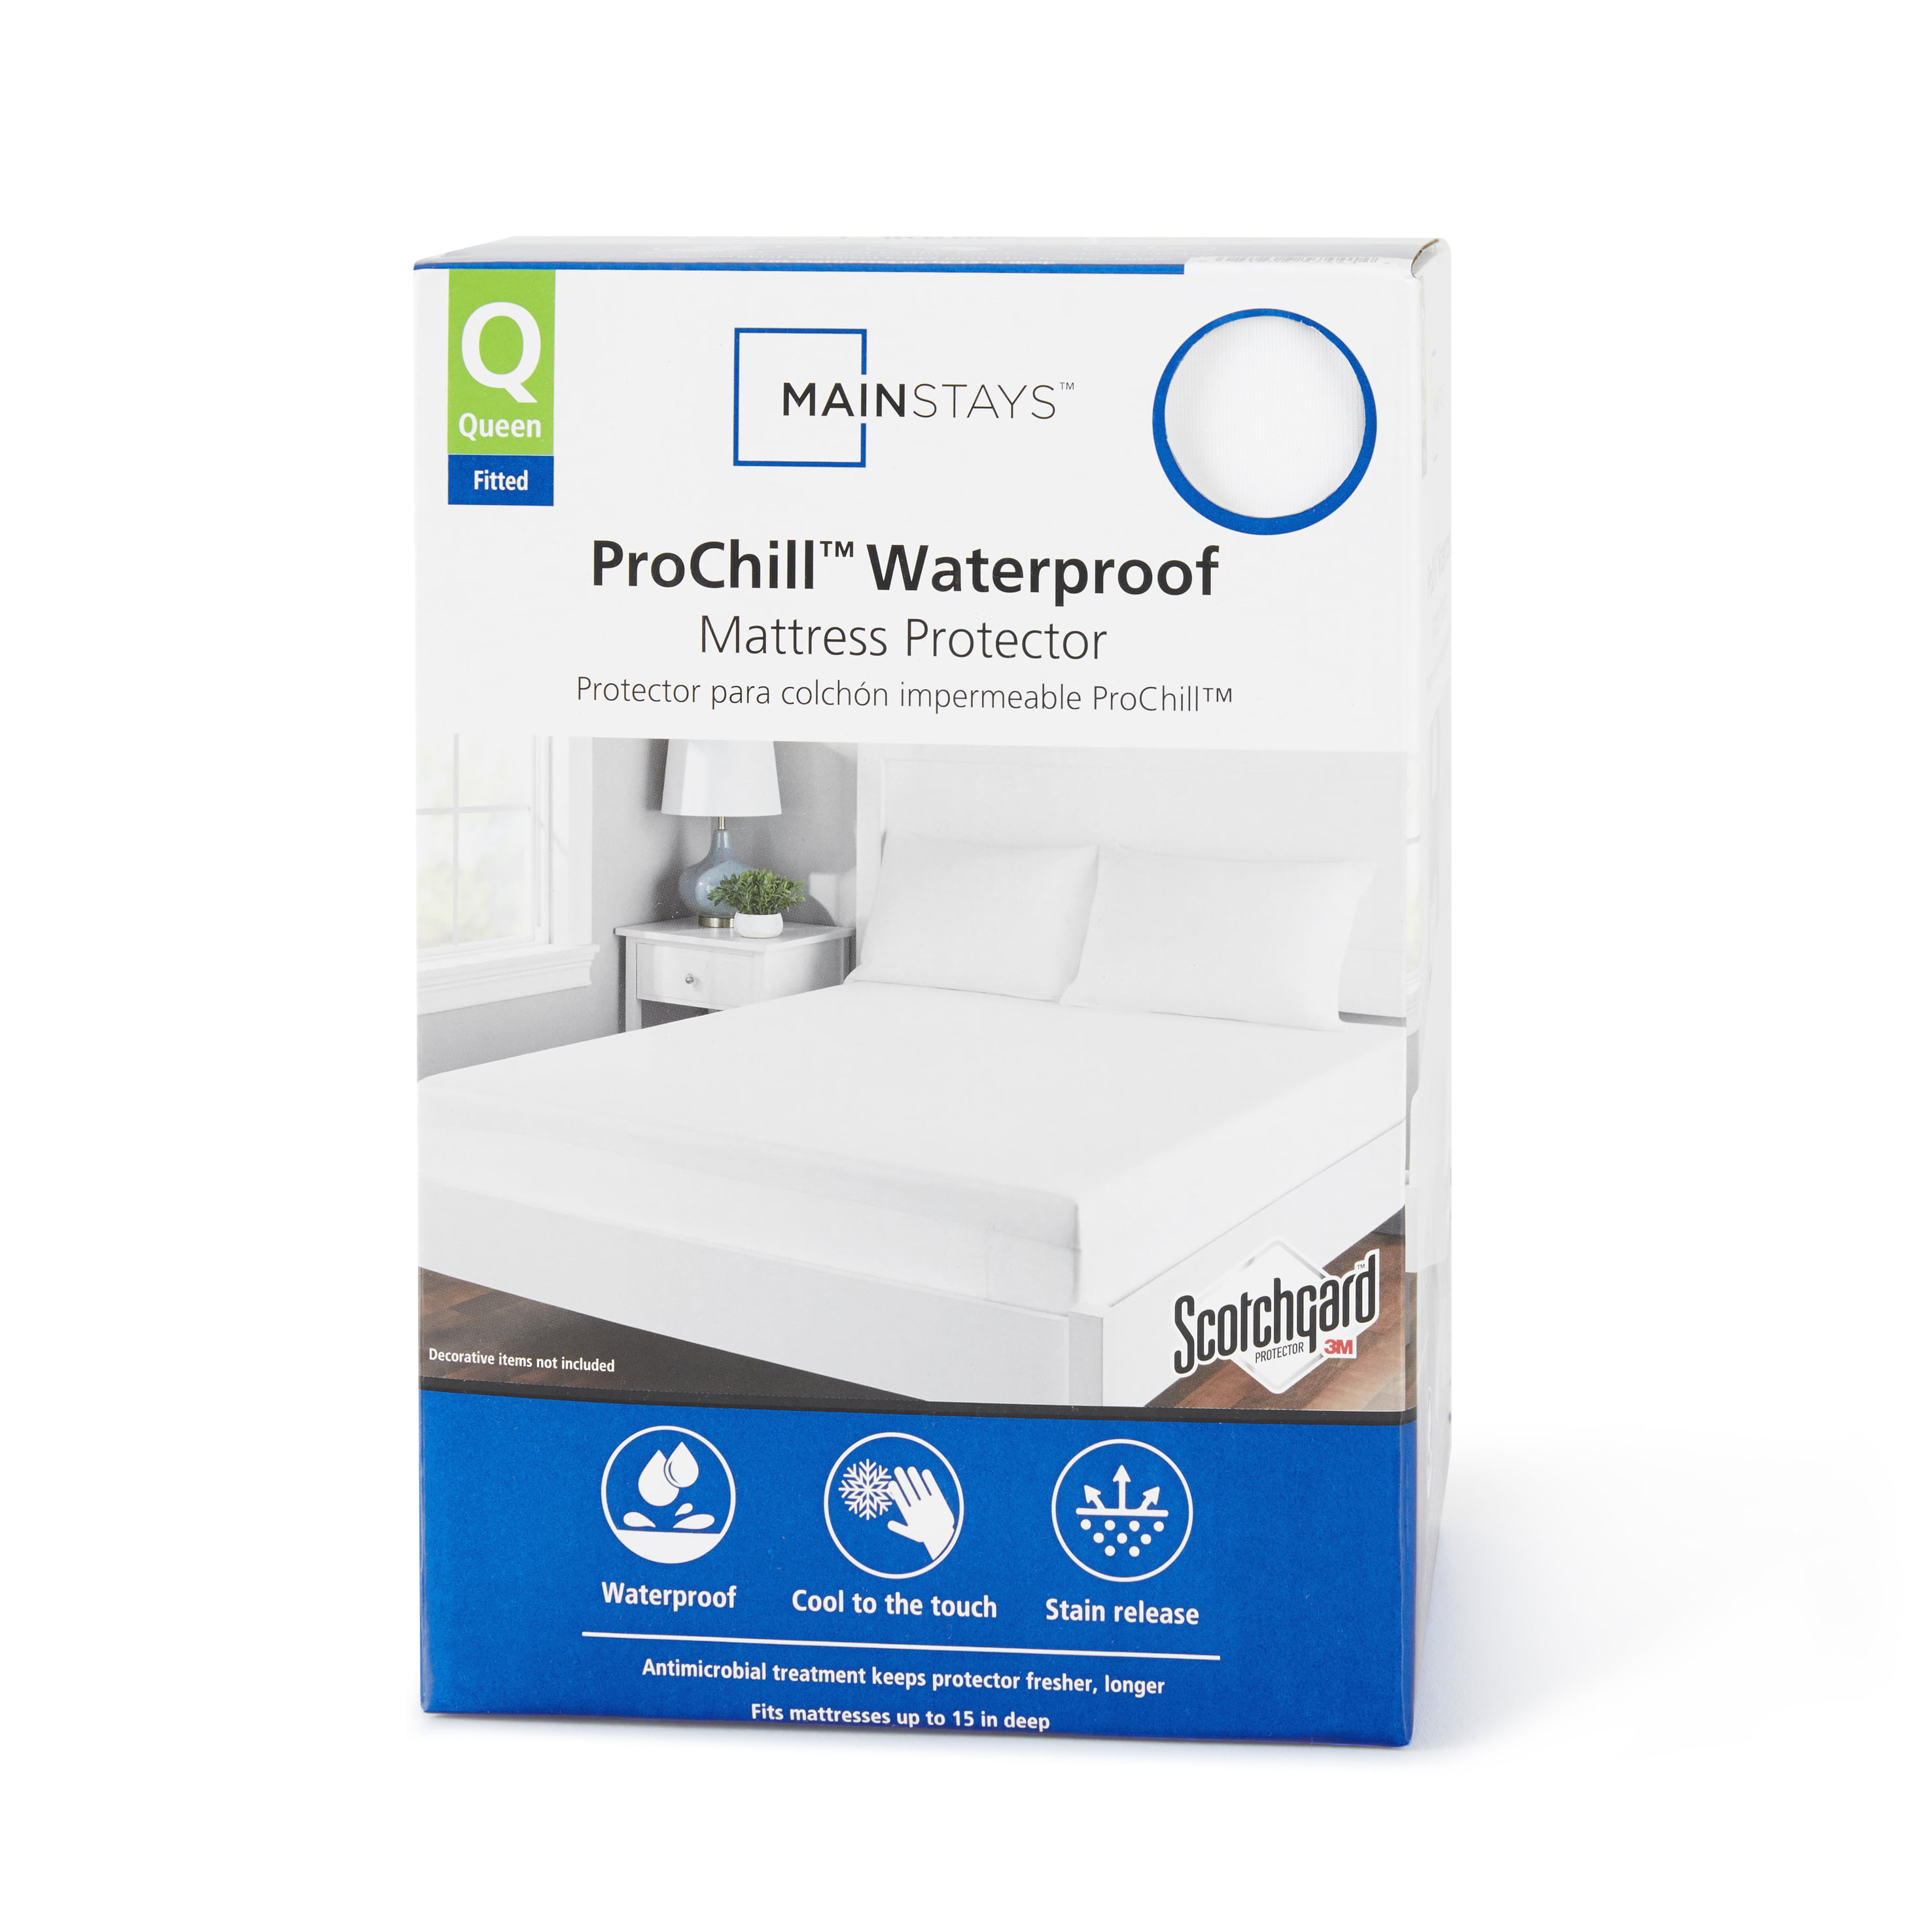 Cooling Smooth Premium Waterproof King Size Mattress Protector Pad Cover 